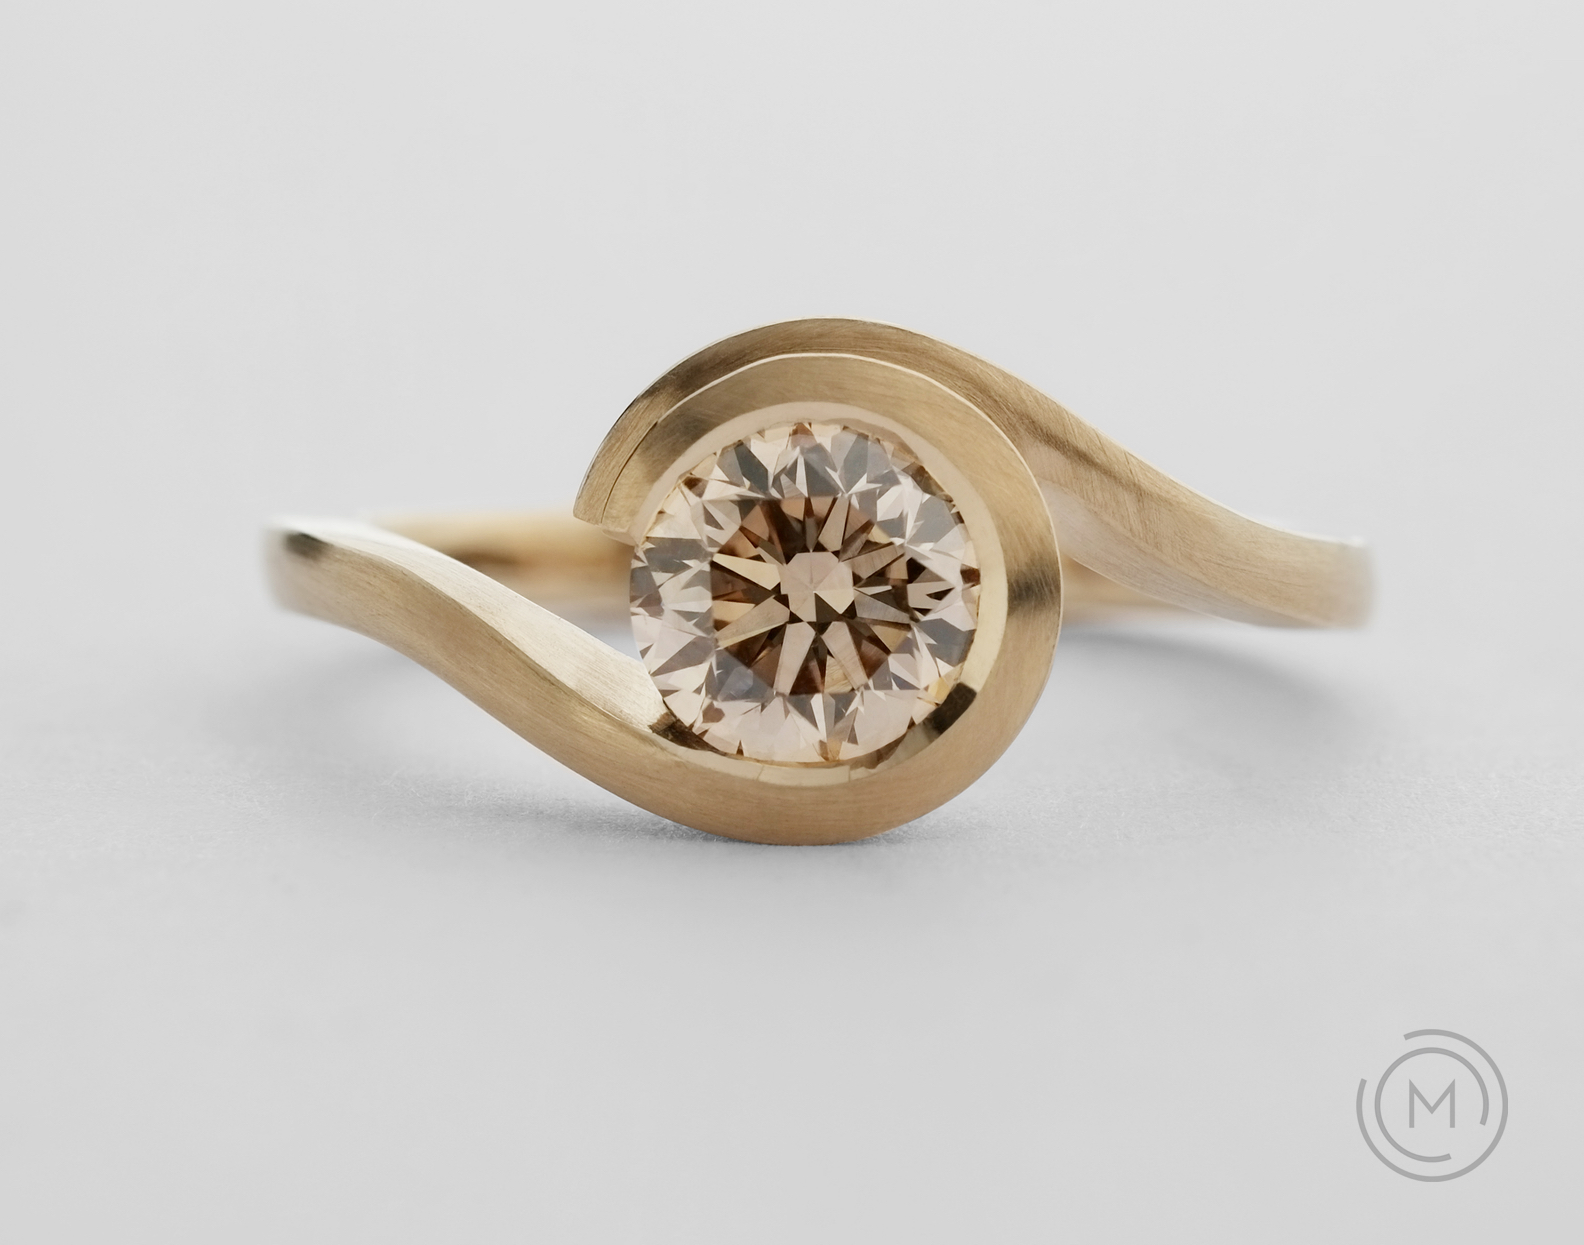 Unusual rose gold engagement ring with cognac coloured diamond